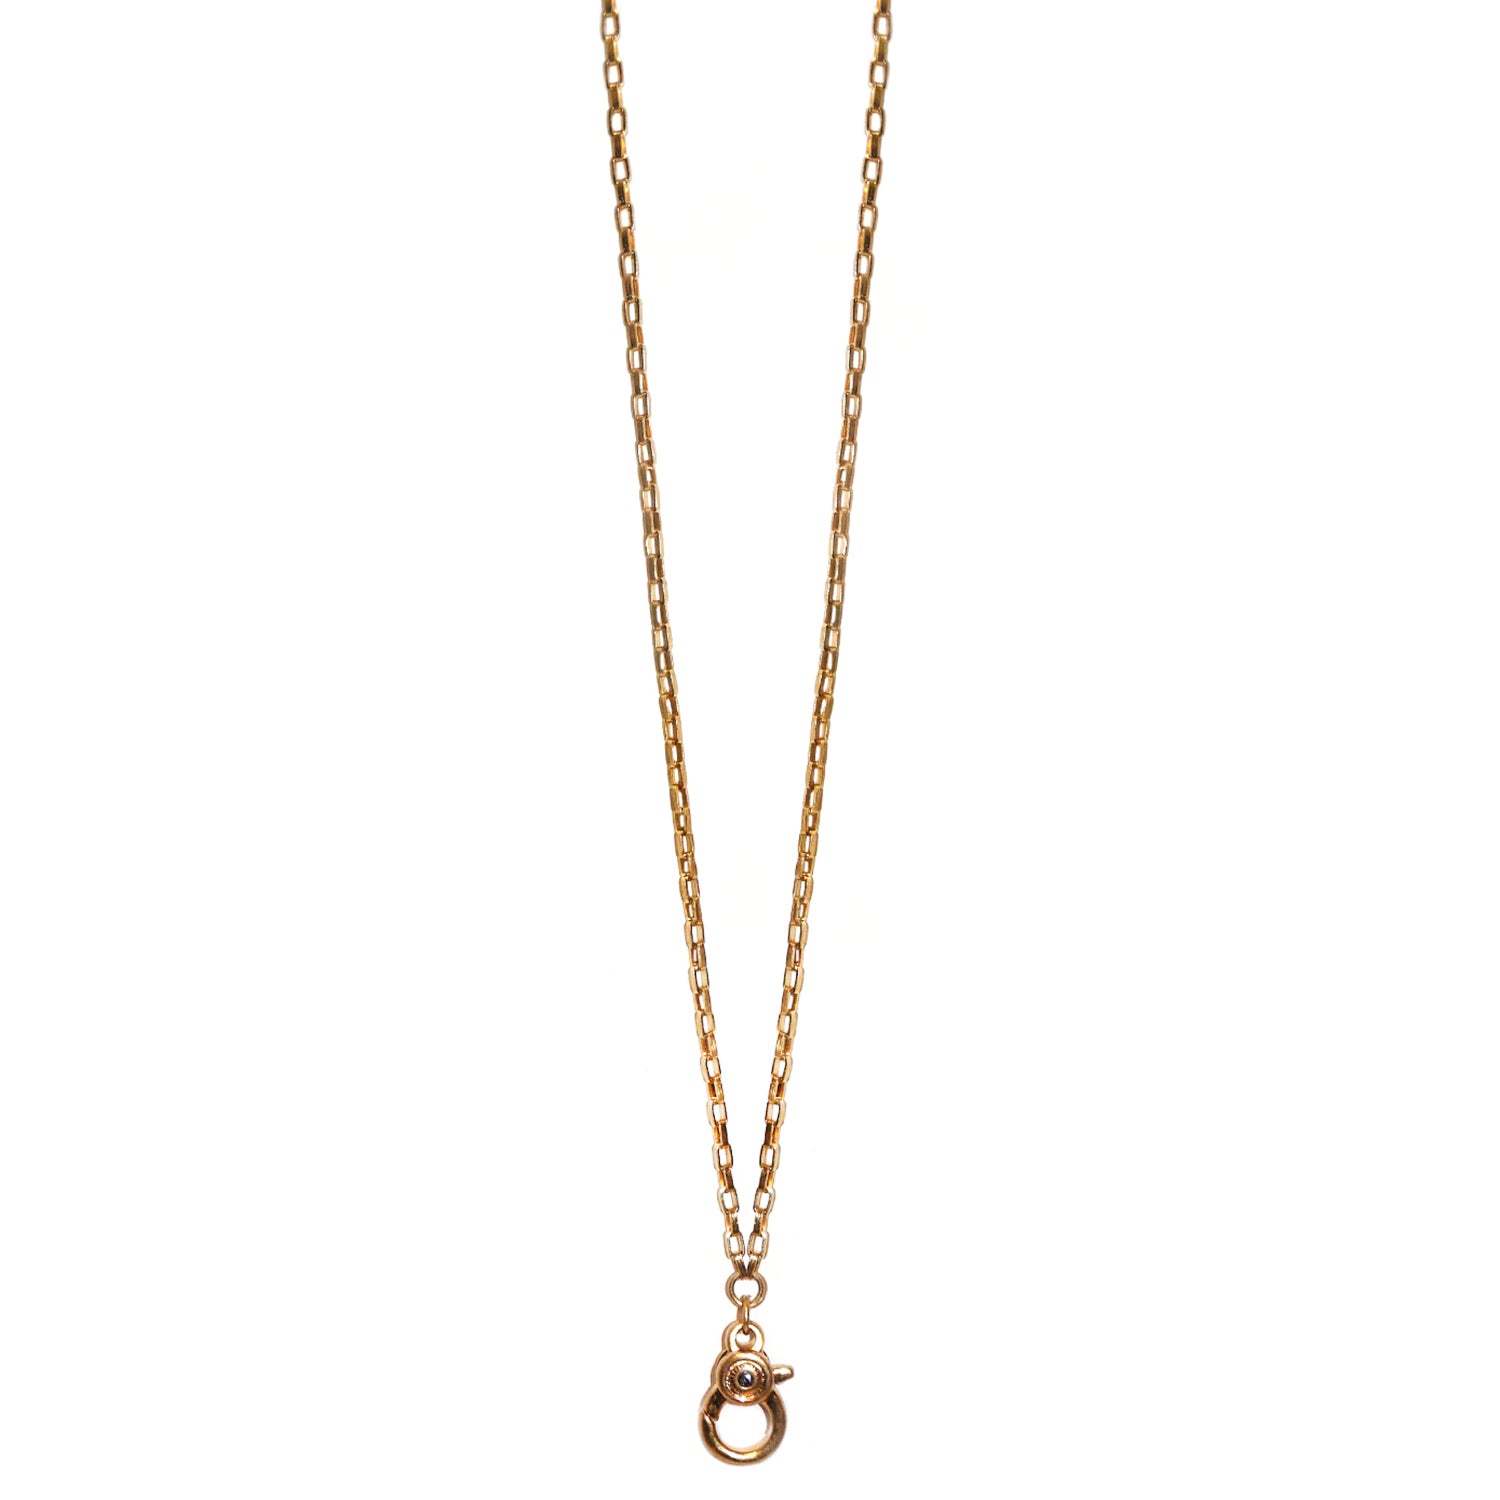 box chain charm necklace for bale charms – Marlyn Schiff, LLC